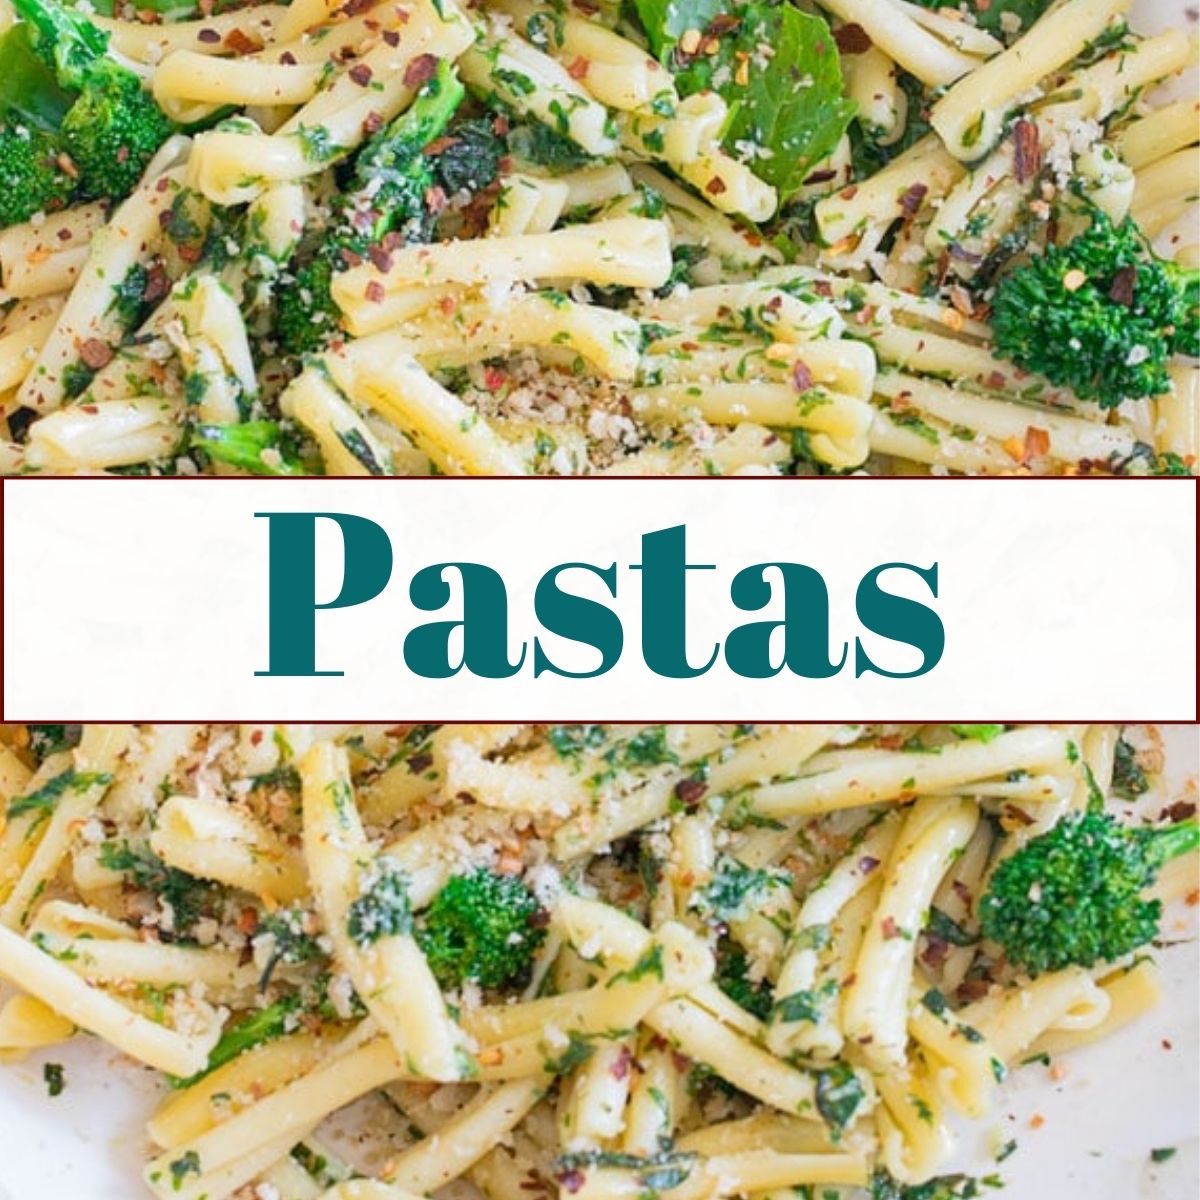 a pasta bowl in the background and the title "pastas" written on it.